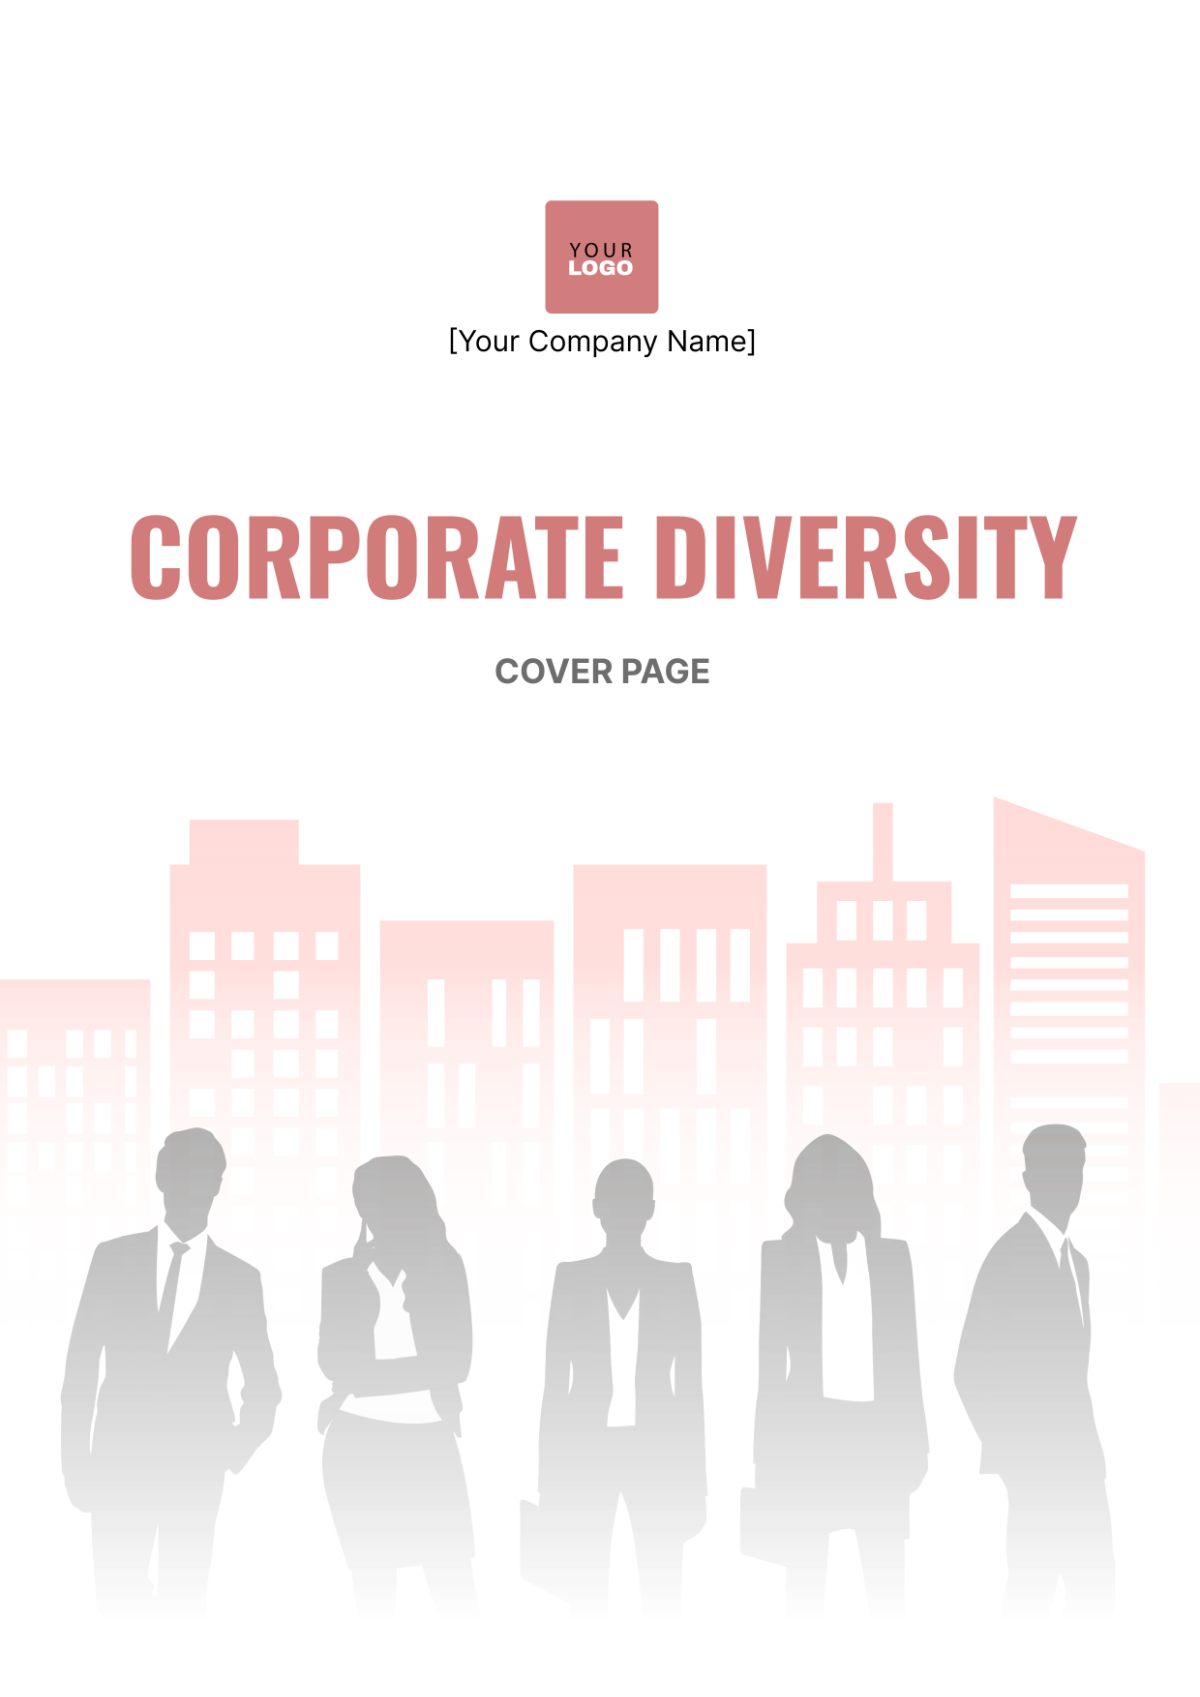 Corporate Diversity Cover Page